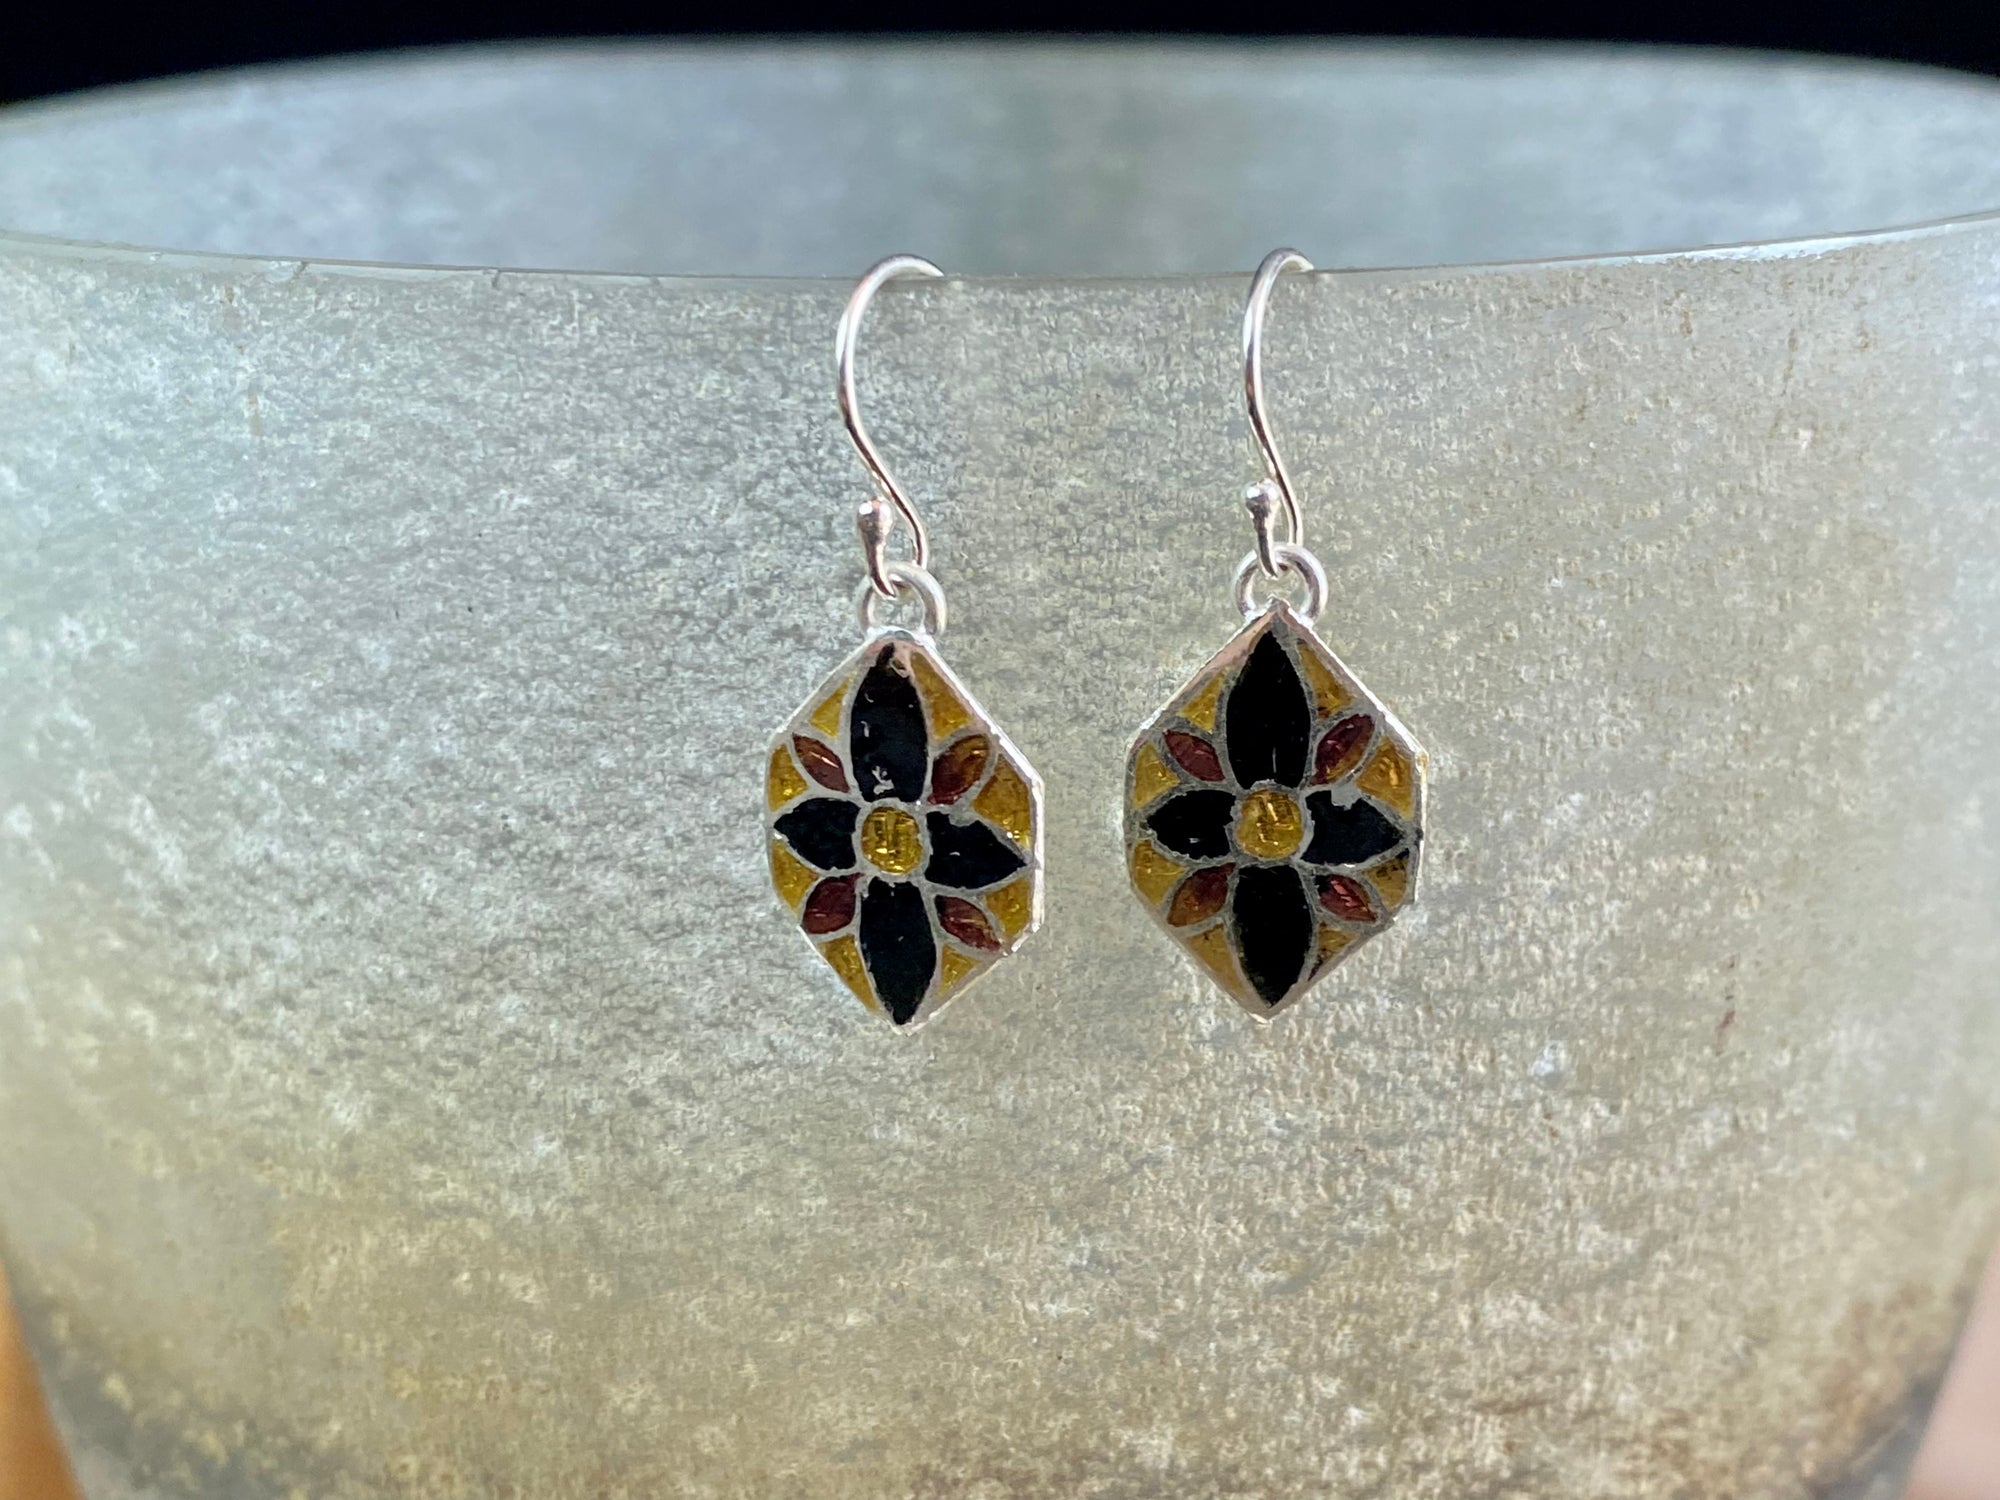 Enamel and sterling silver earrings from Jaipur, India. Lightweight and easy to wear, with sterling silver hooks. Plain silver backs. Length 2.7 cm 